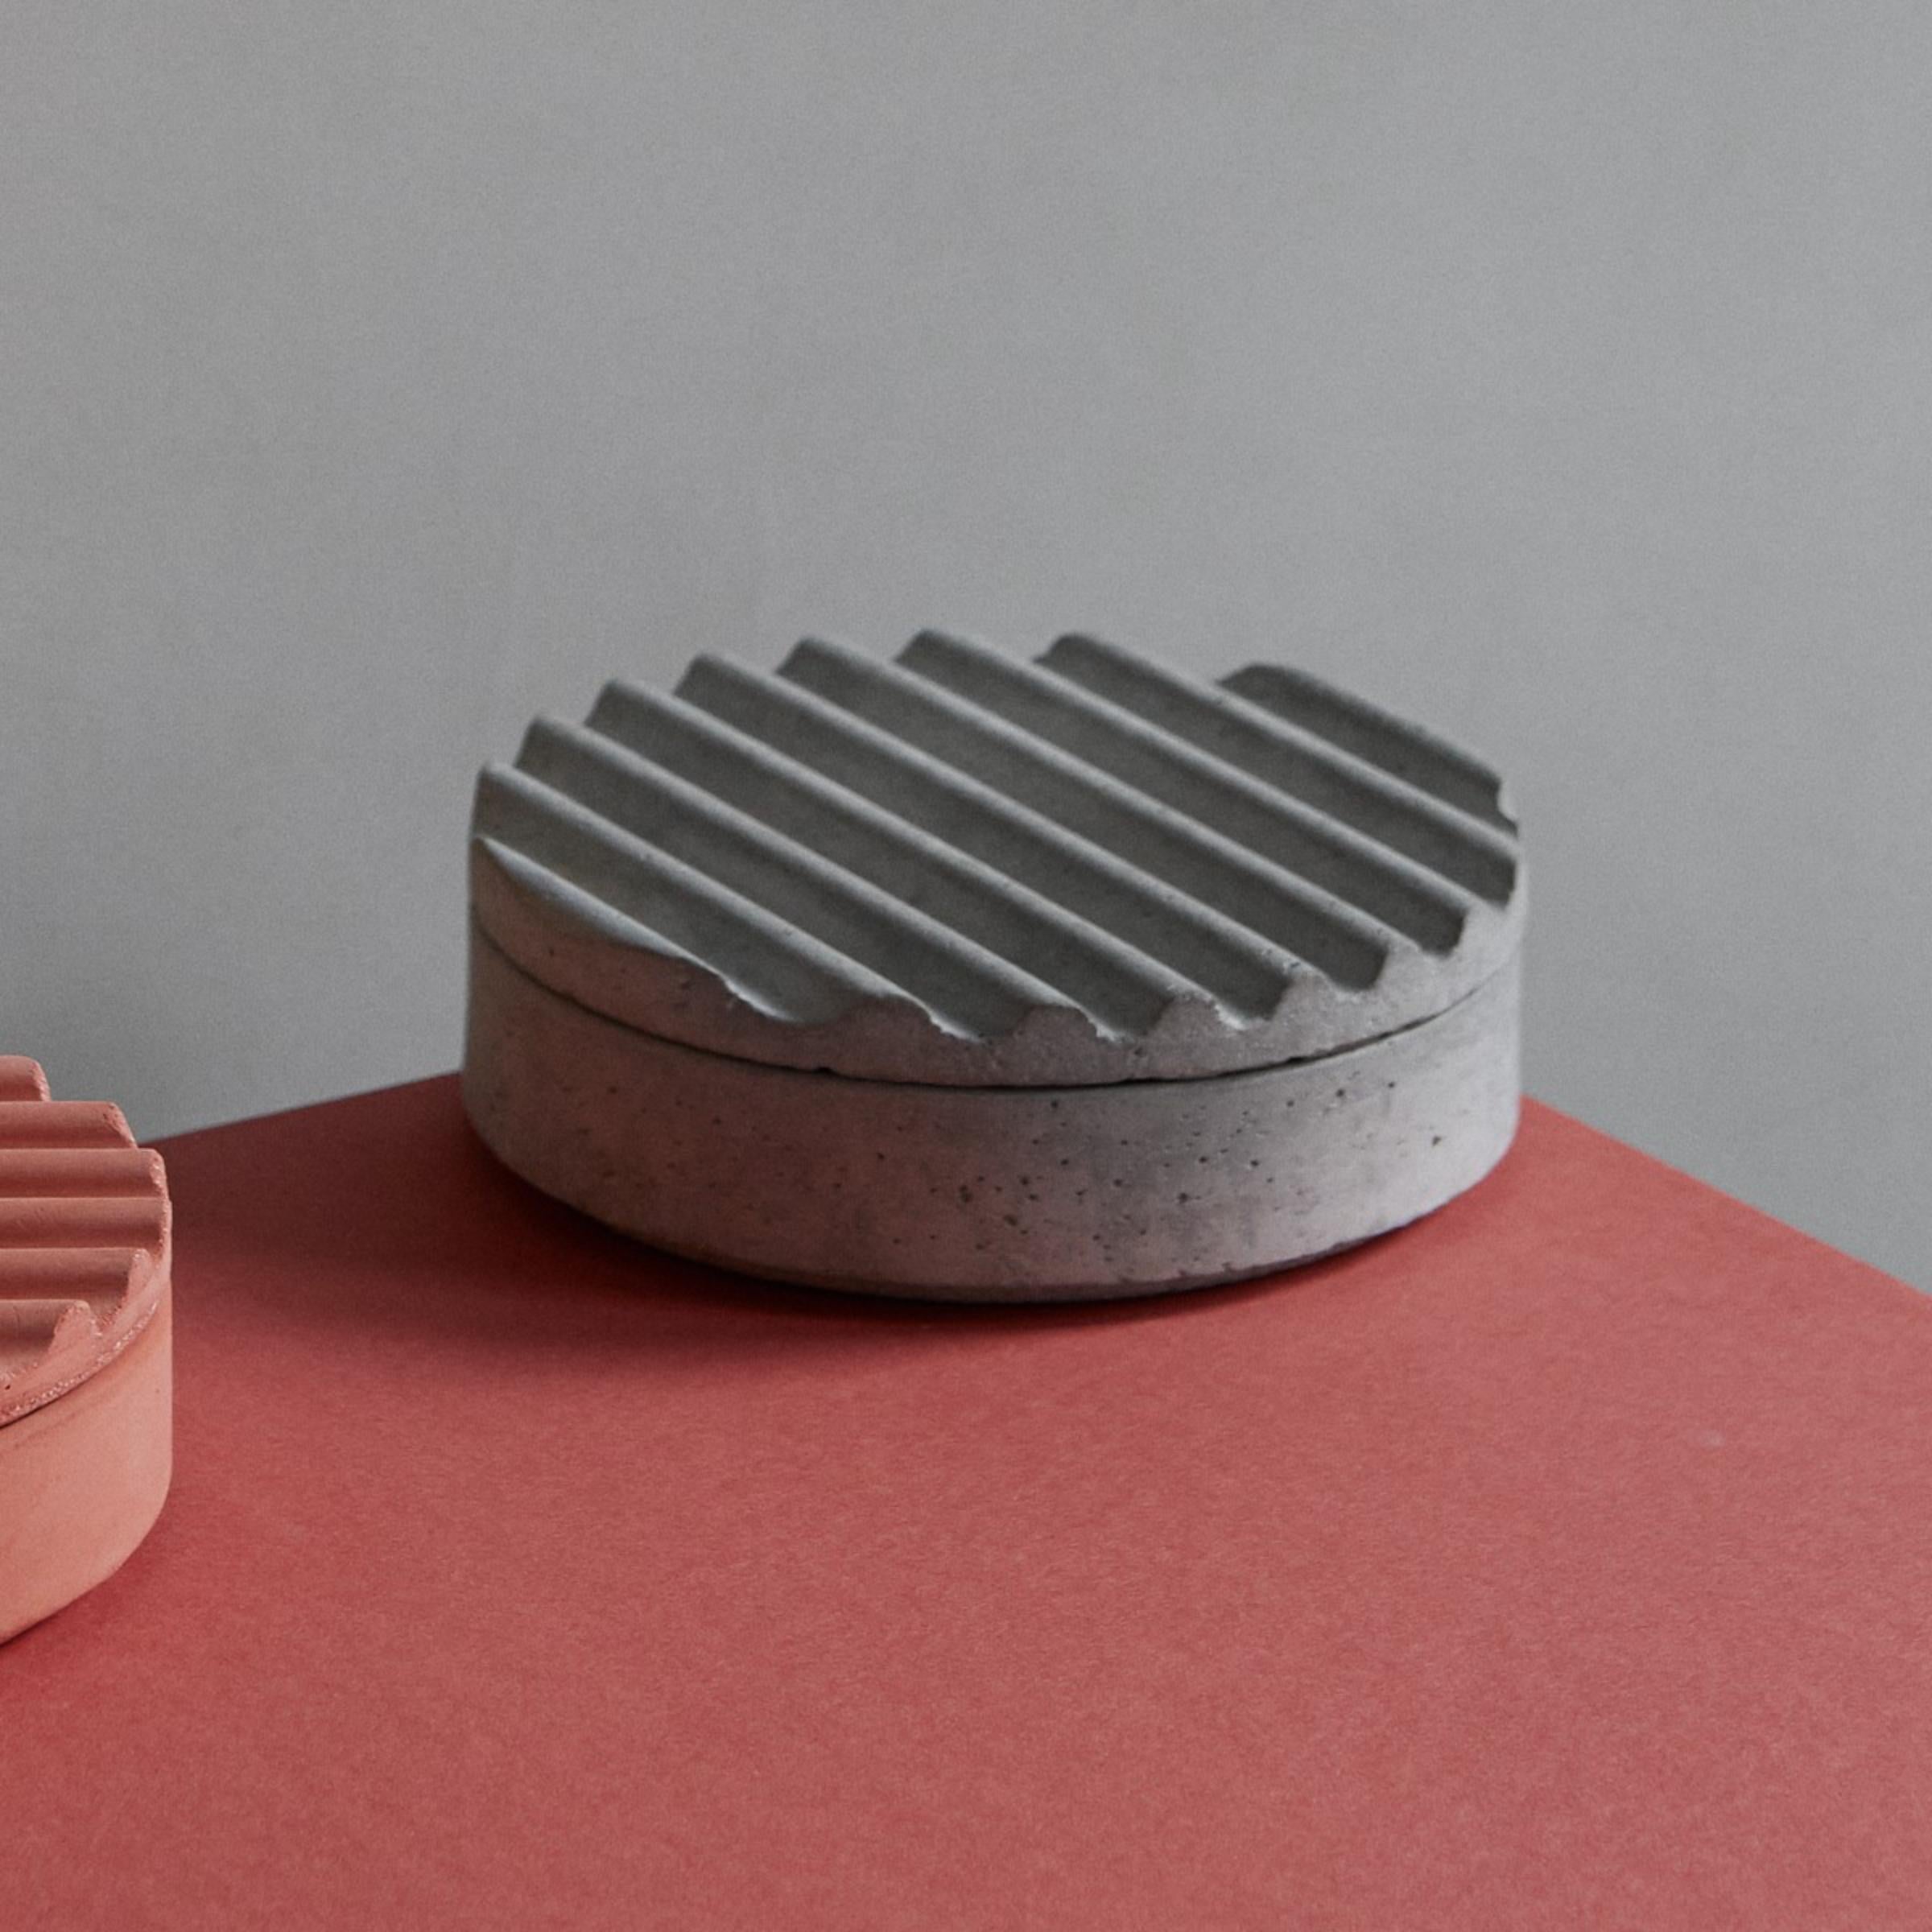 Set Of 4 Ripple Vessel by Derya Arpac
Dimensions: D 17 x H 7 cm
Materials: Pigmented Concrete
Also Available: Other colours available

Derya Arpac is a Copenhagen based architect and furniture designer.
She holds a Master of Arts in